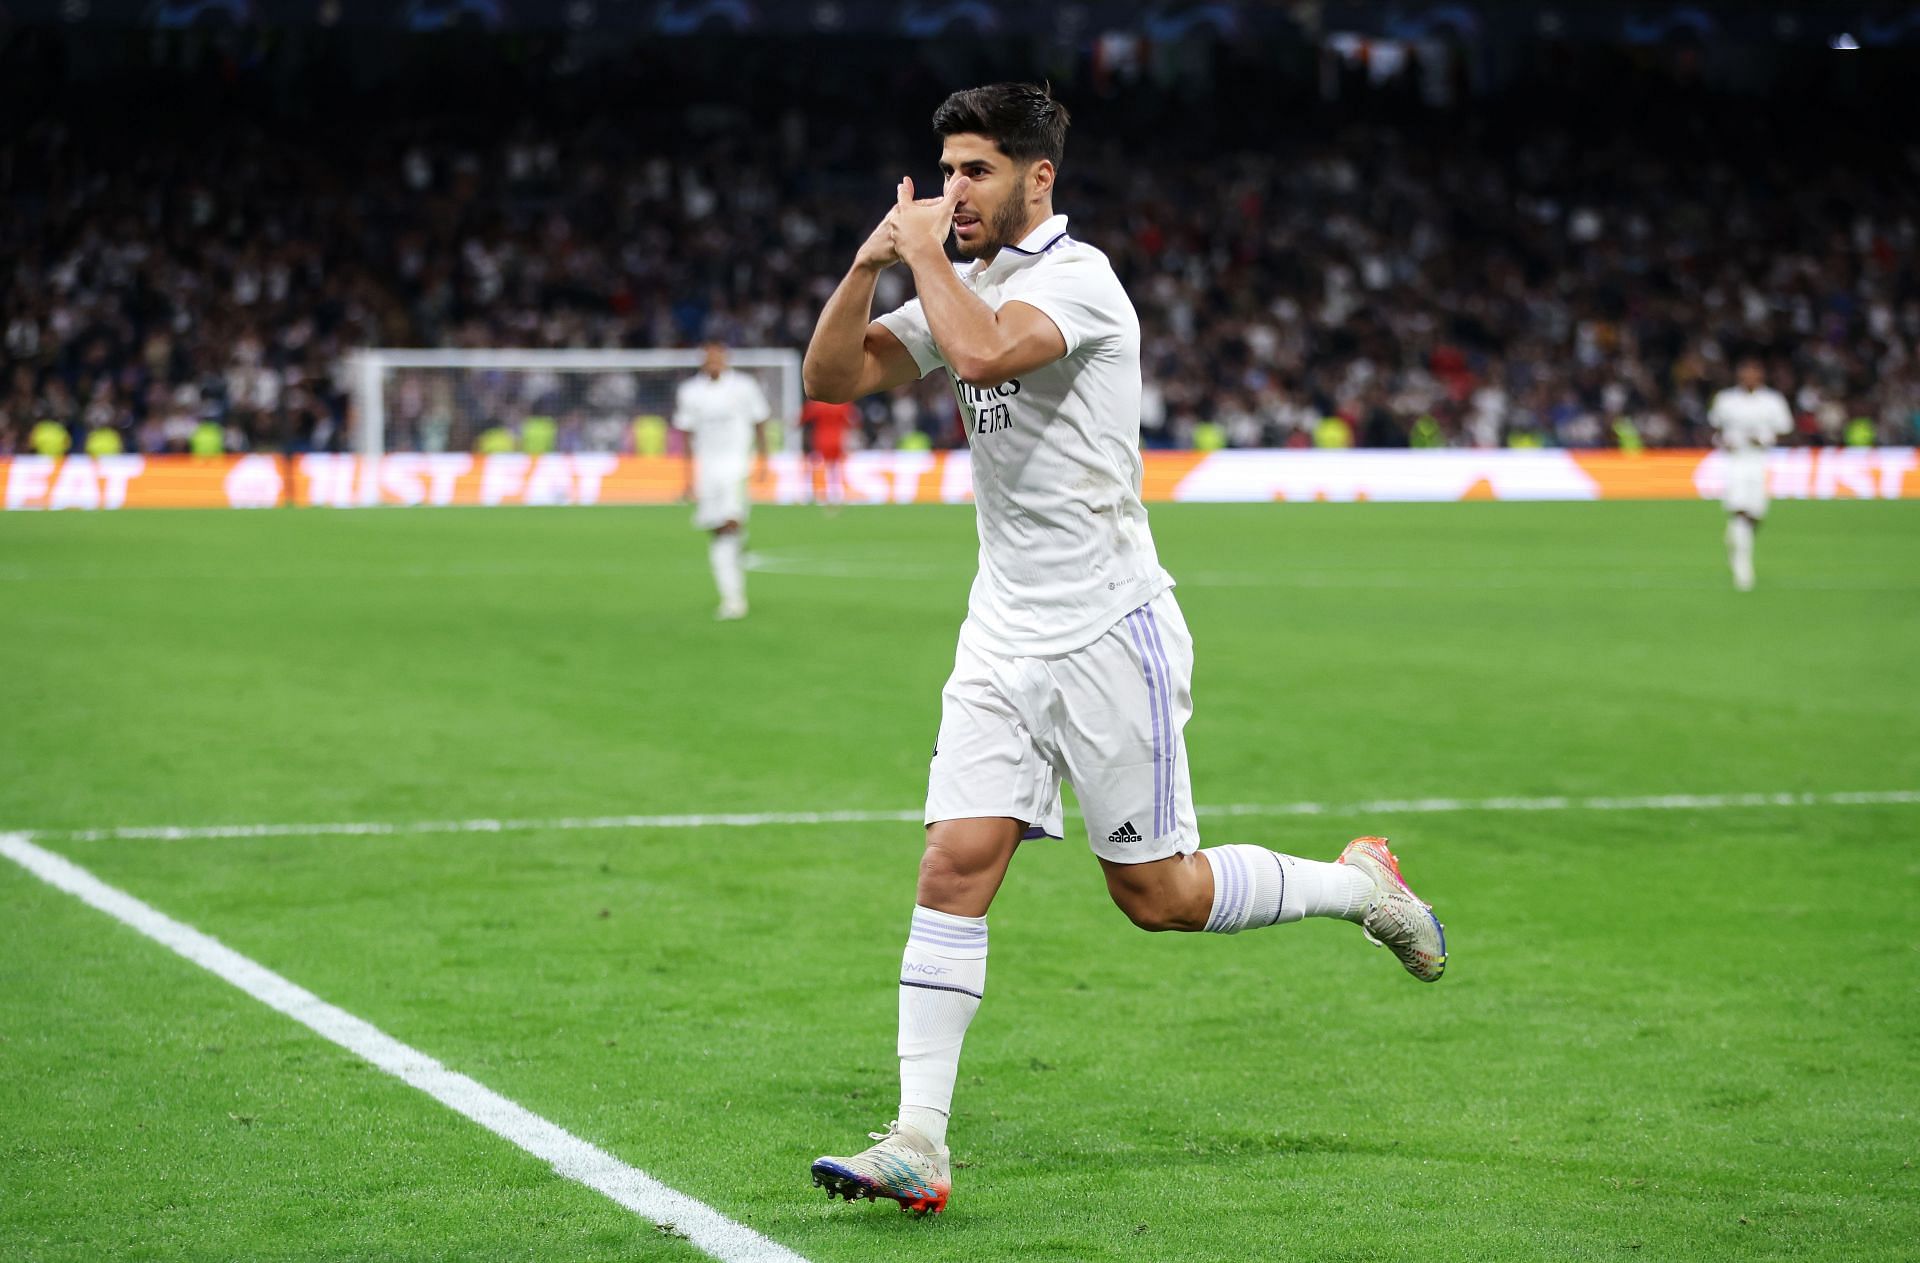 Marco Asensio was immense in the group stages